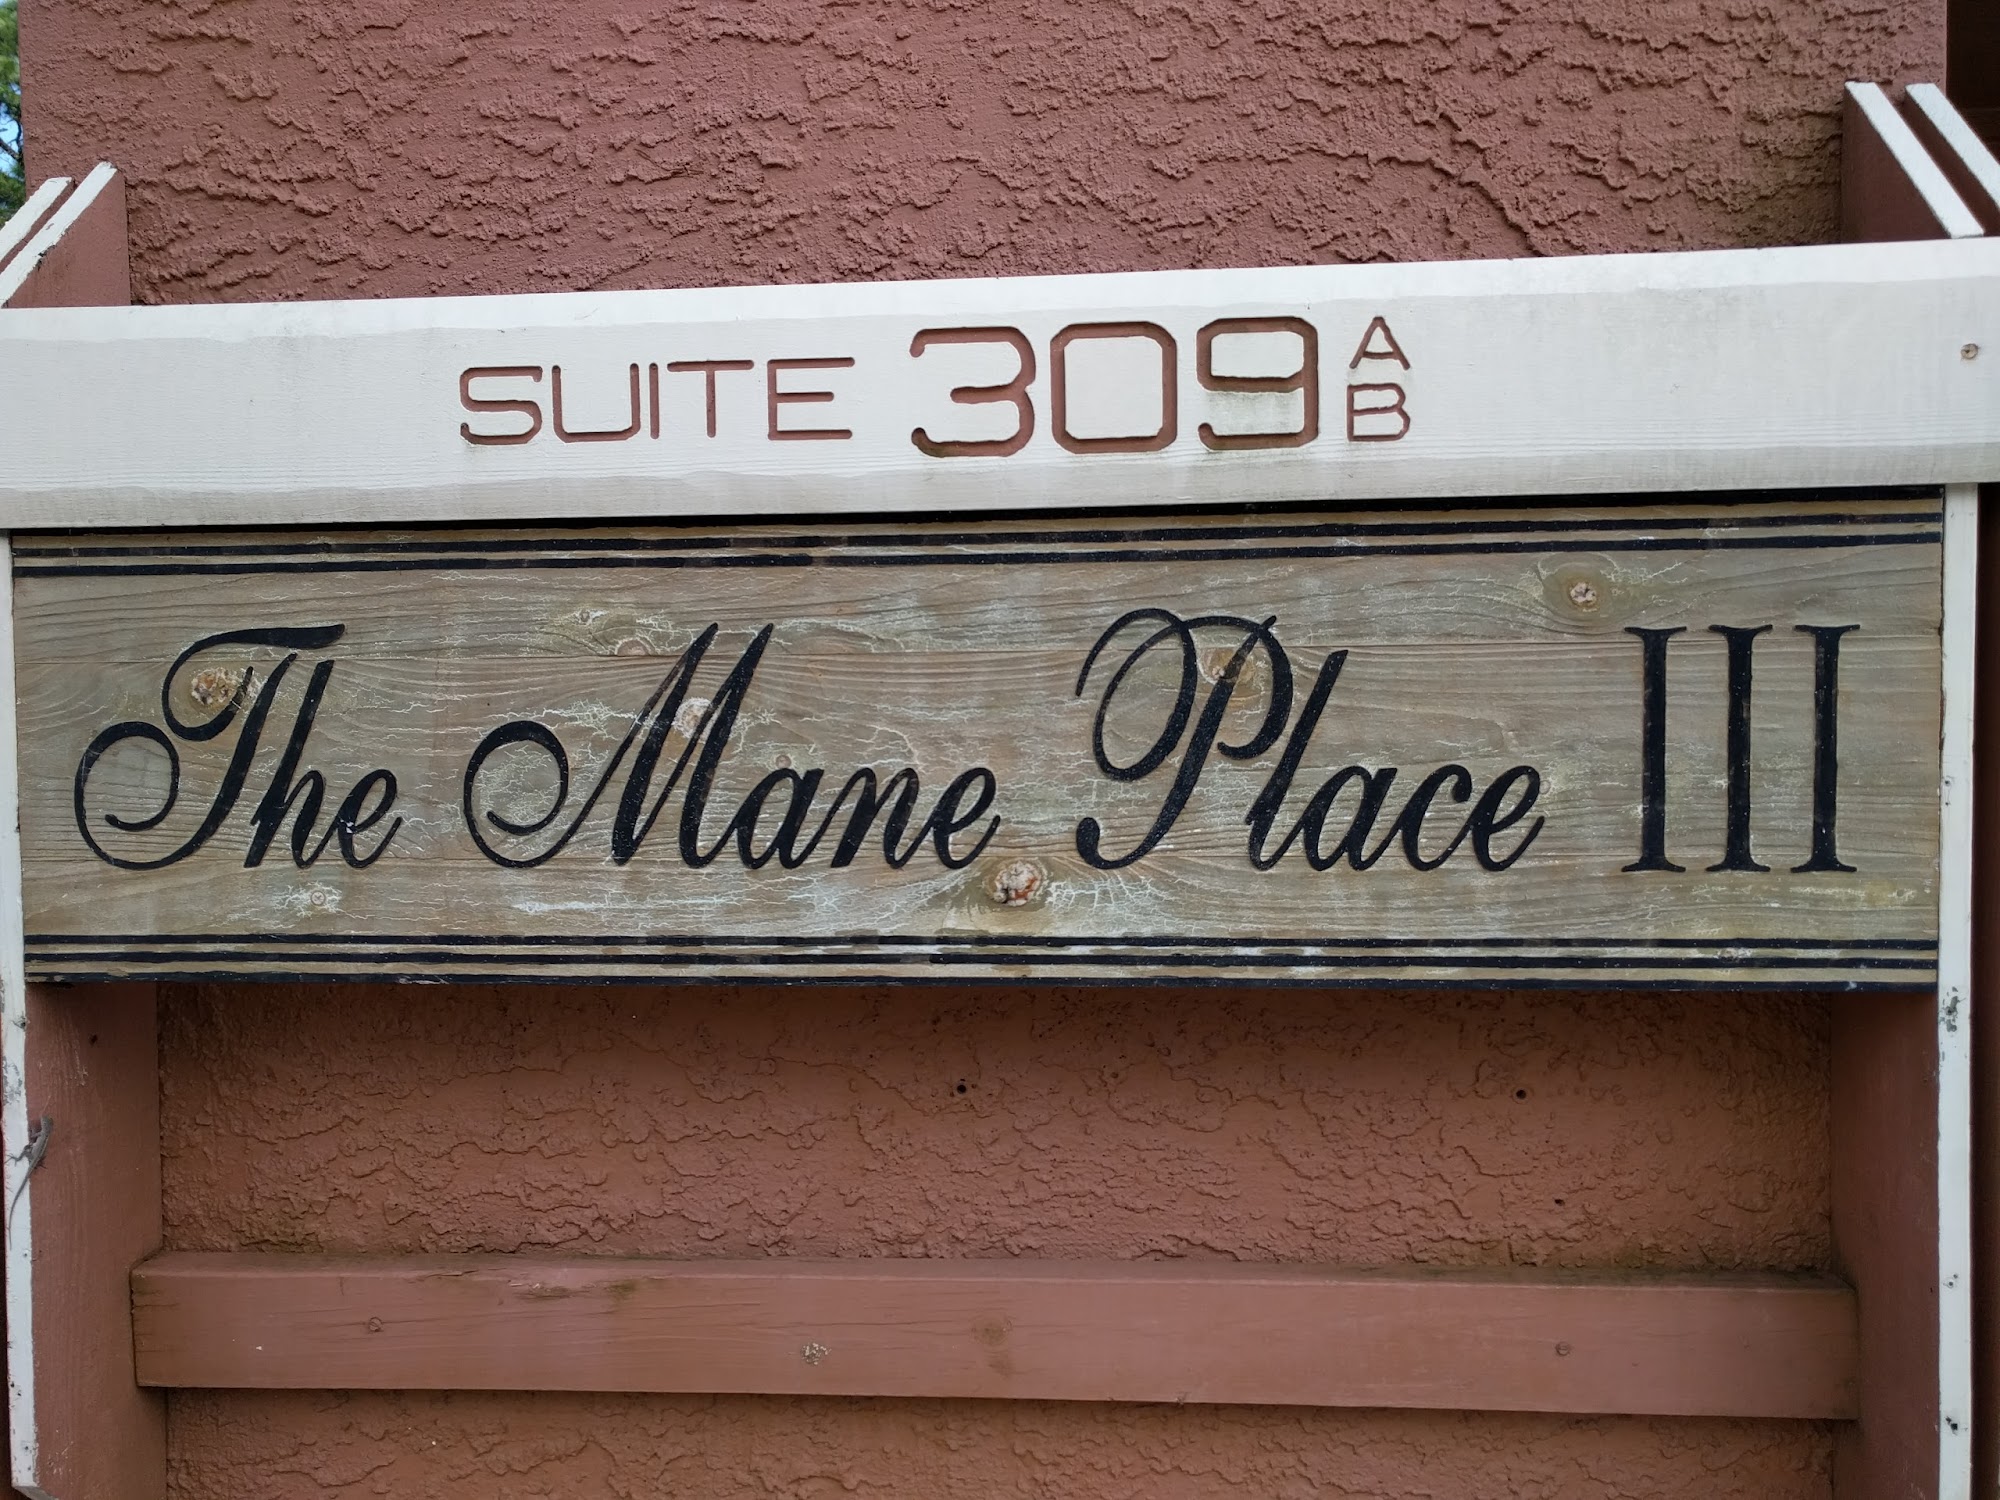 The Mane Place III